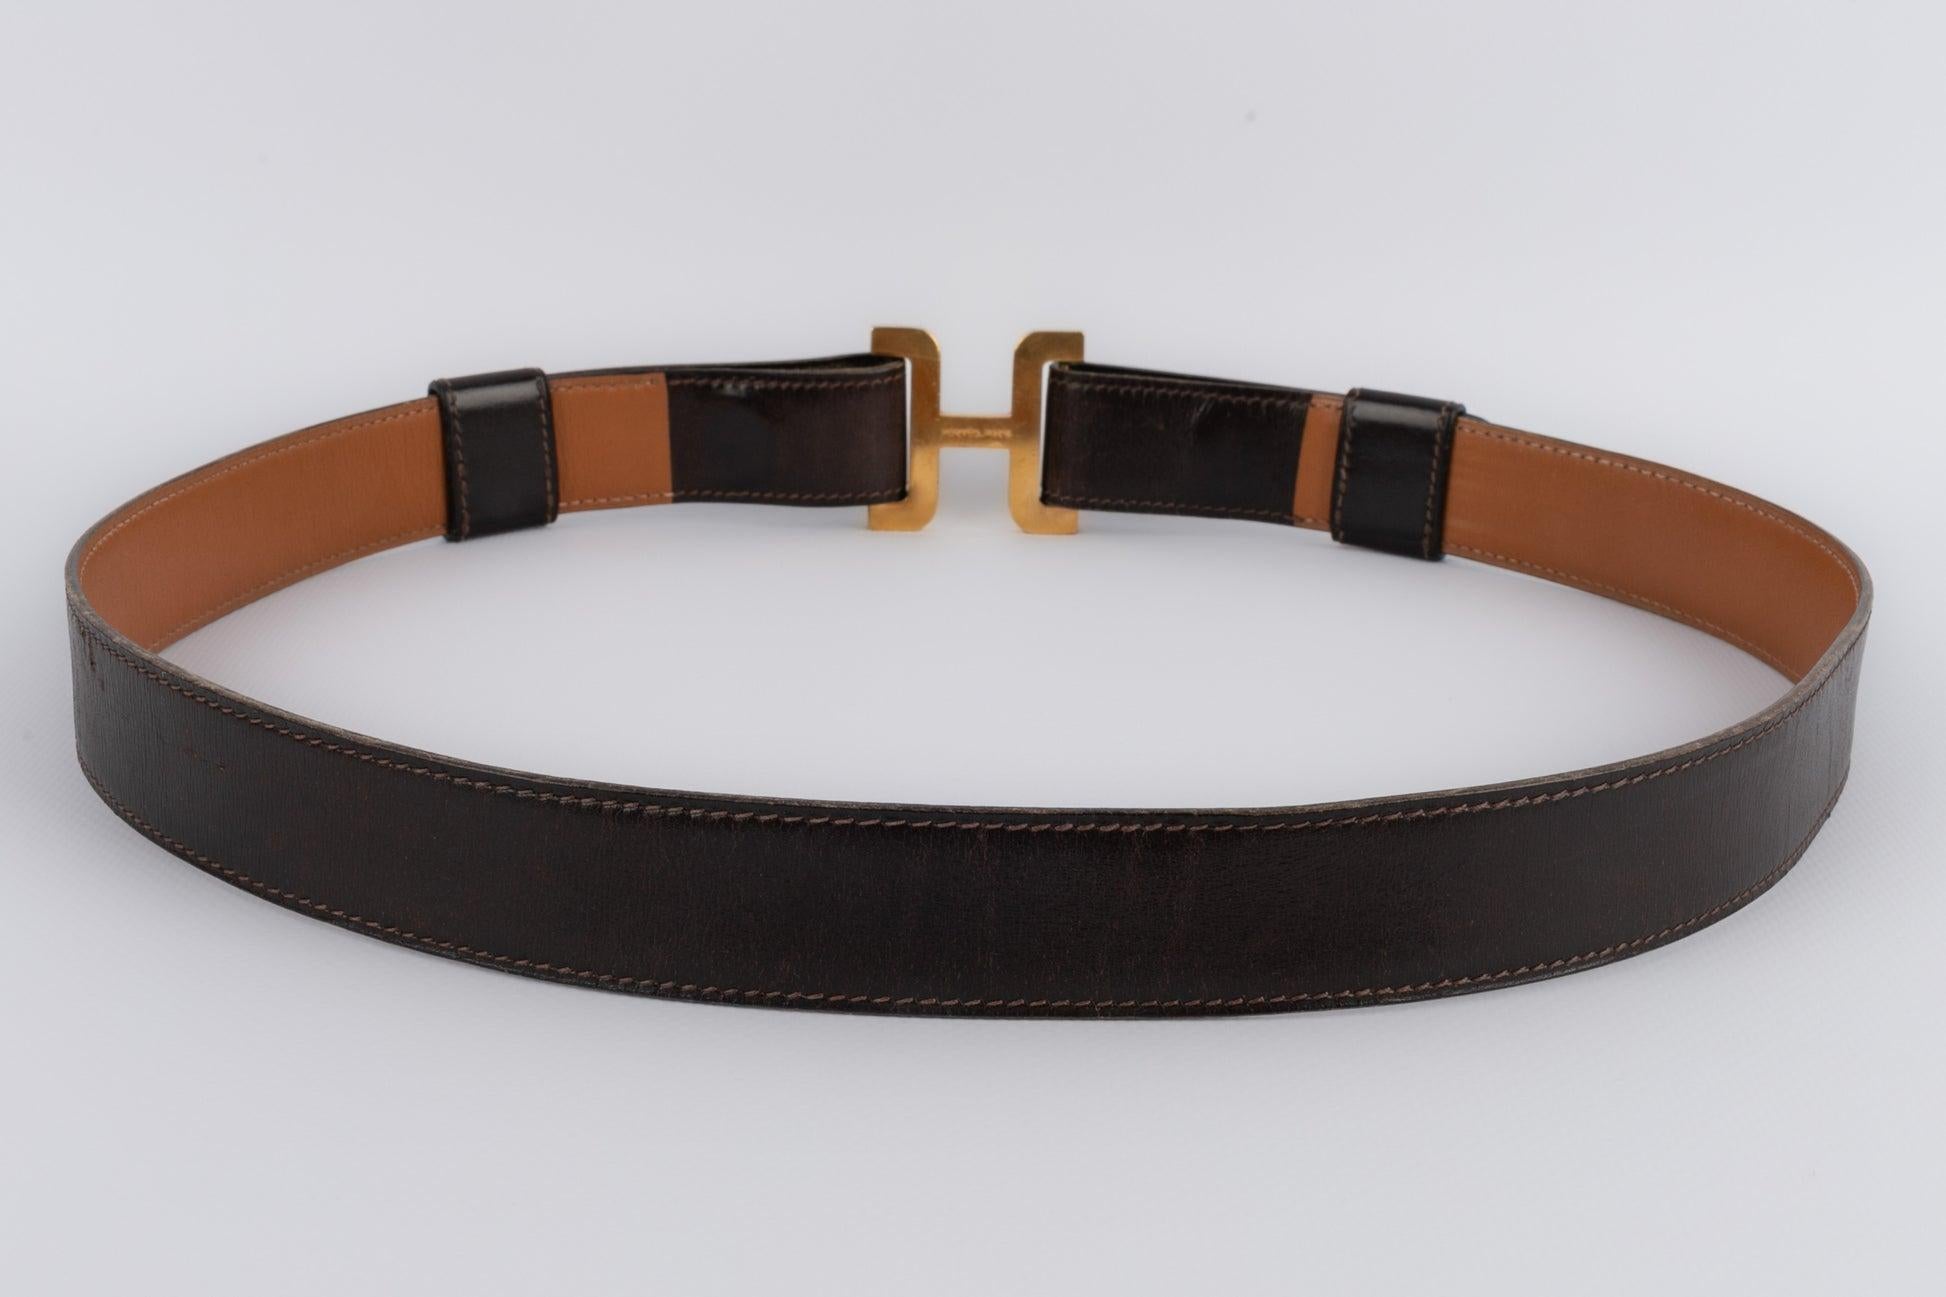 Hermès - (Made in France) Brown leather belt with a golden metal buckle. To be mentioned, the leather is slightly worn.

Additional information:
Condition: Good condition
Dimensions: Length: from 87 cm to 93 cm

Seller Reference: ACC136